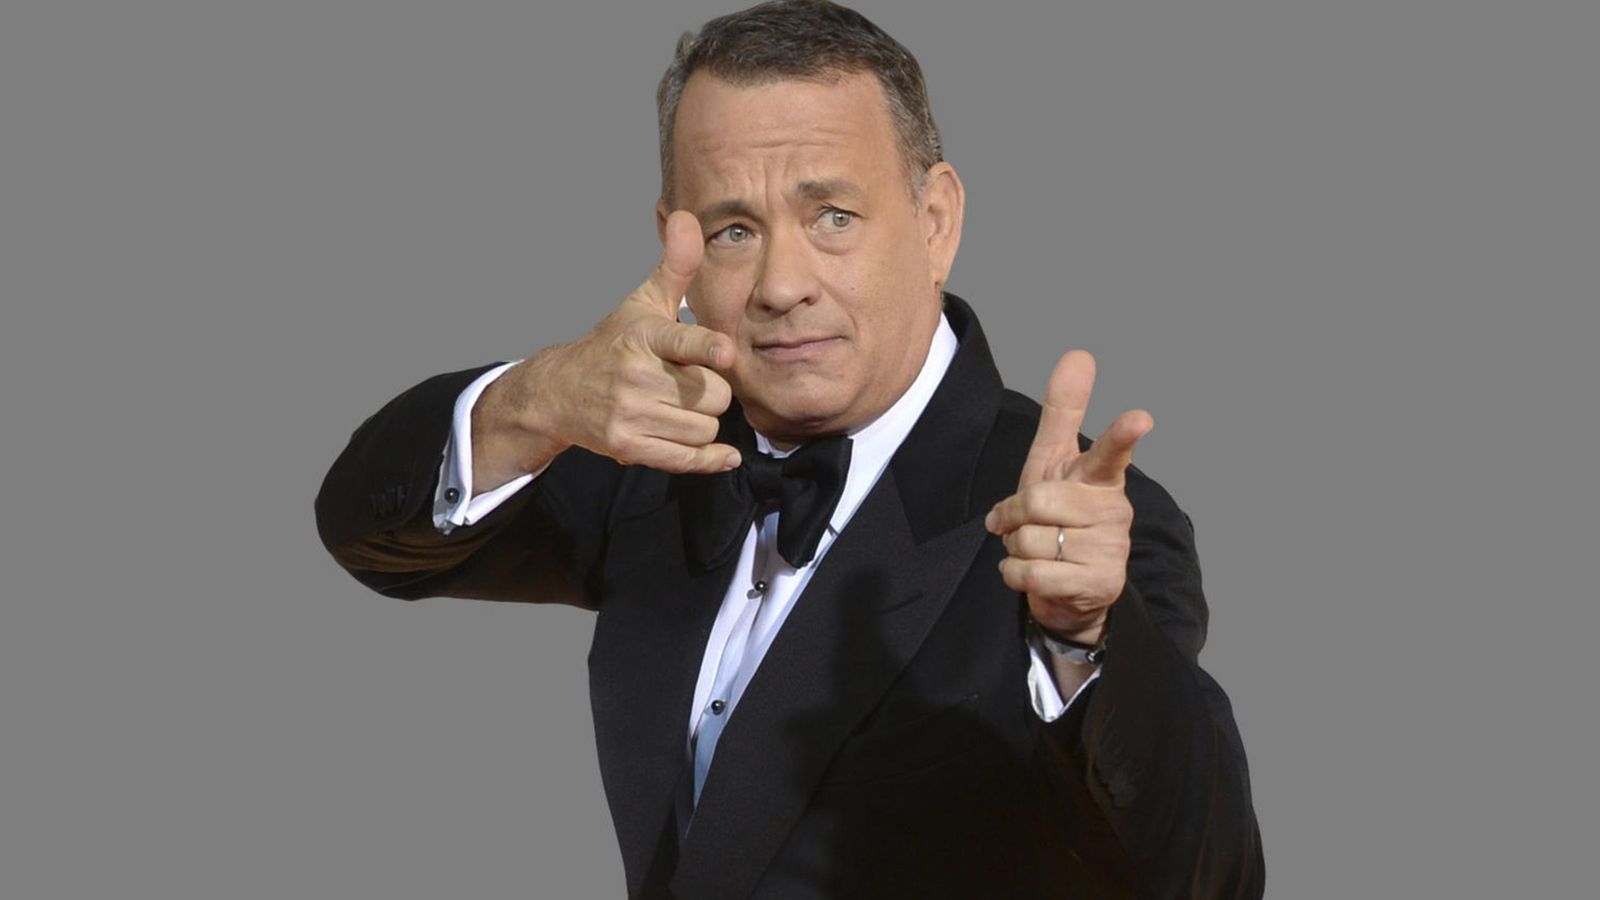 Tom Hanks Doesn’t Want To Play A Good Guy